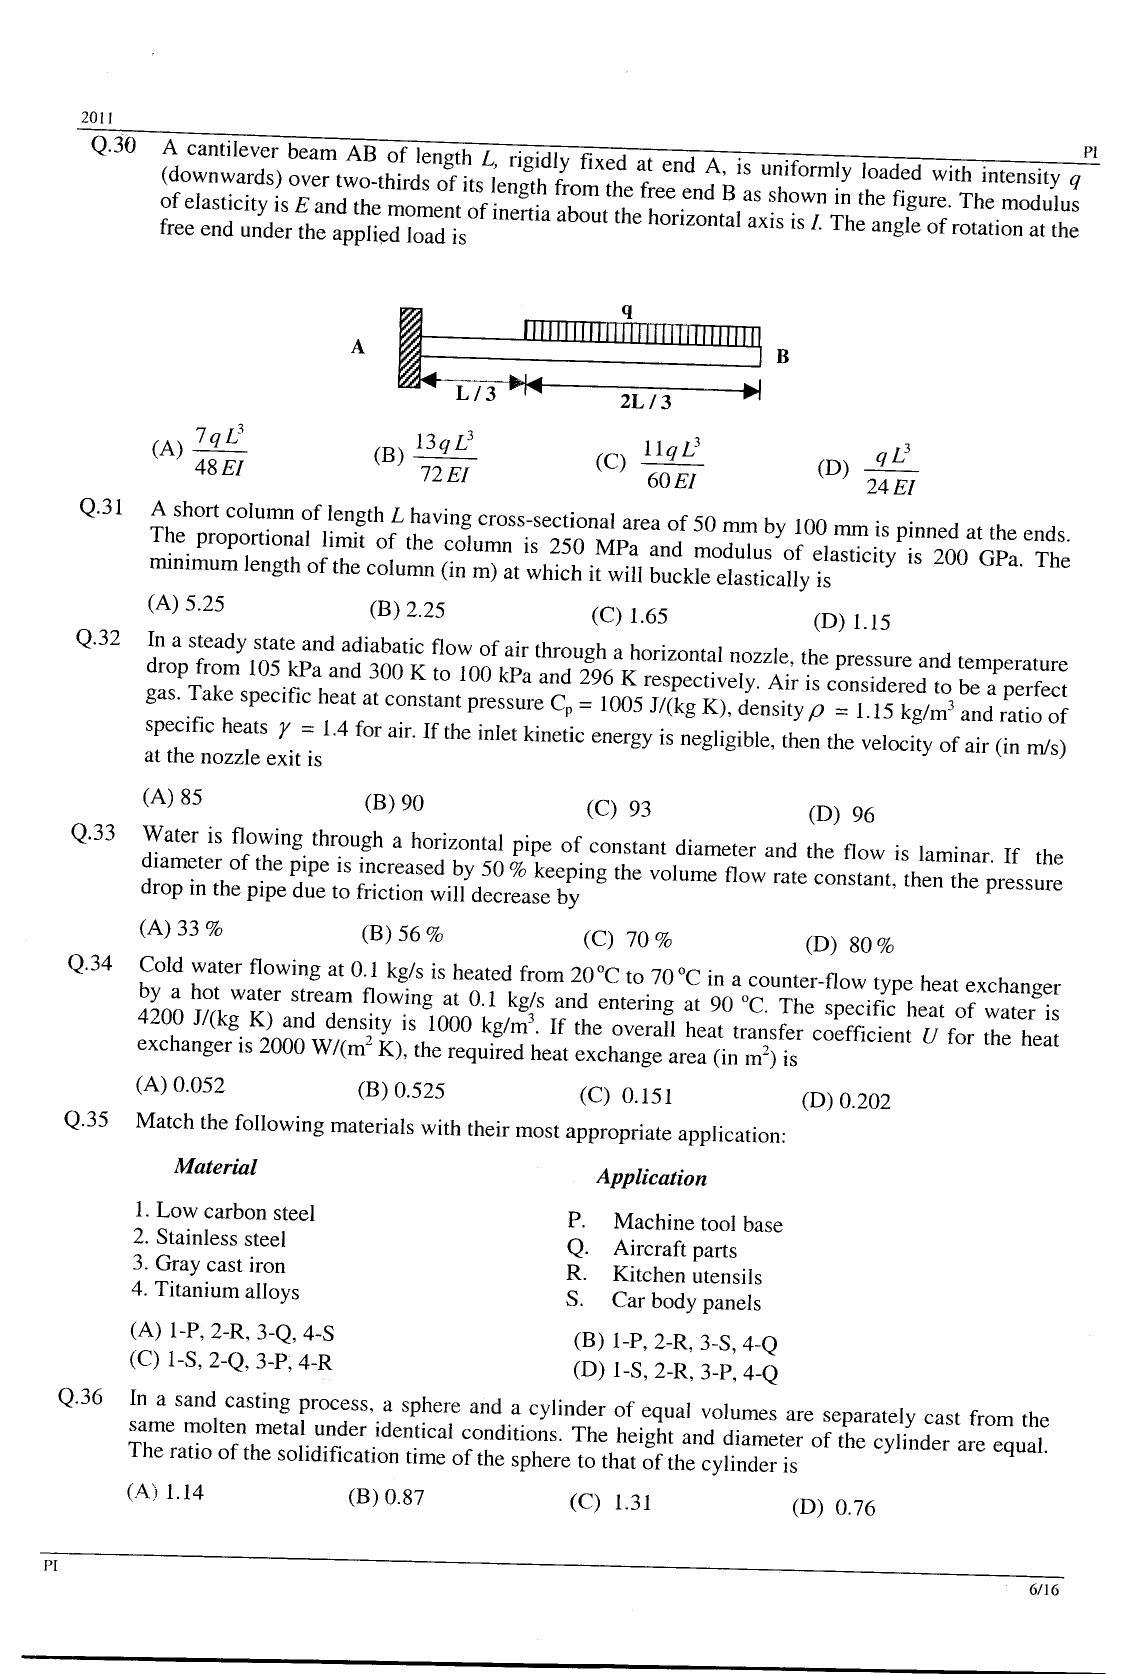 GATE 2011 Production and Industrial Engineering (PI) Question Paper with Answer Key - Page 6